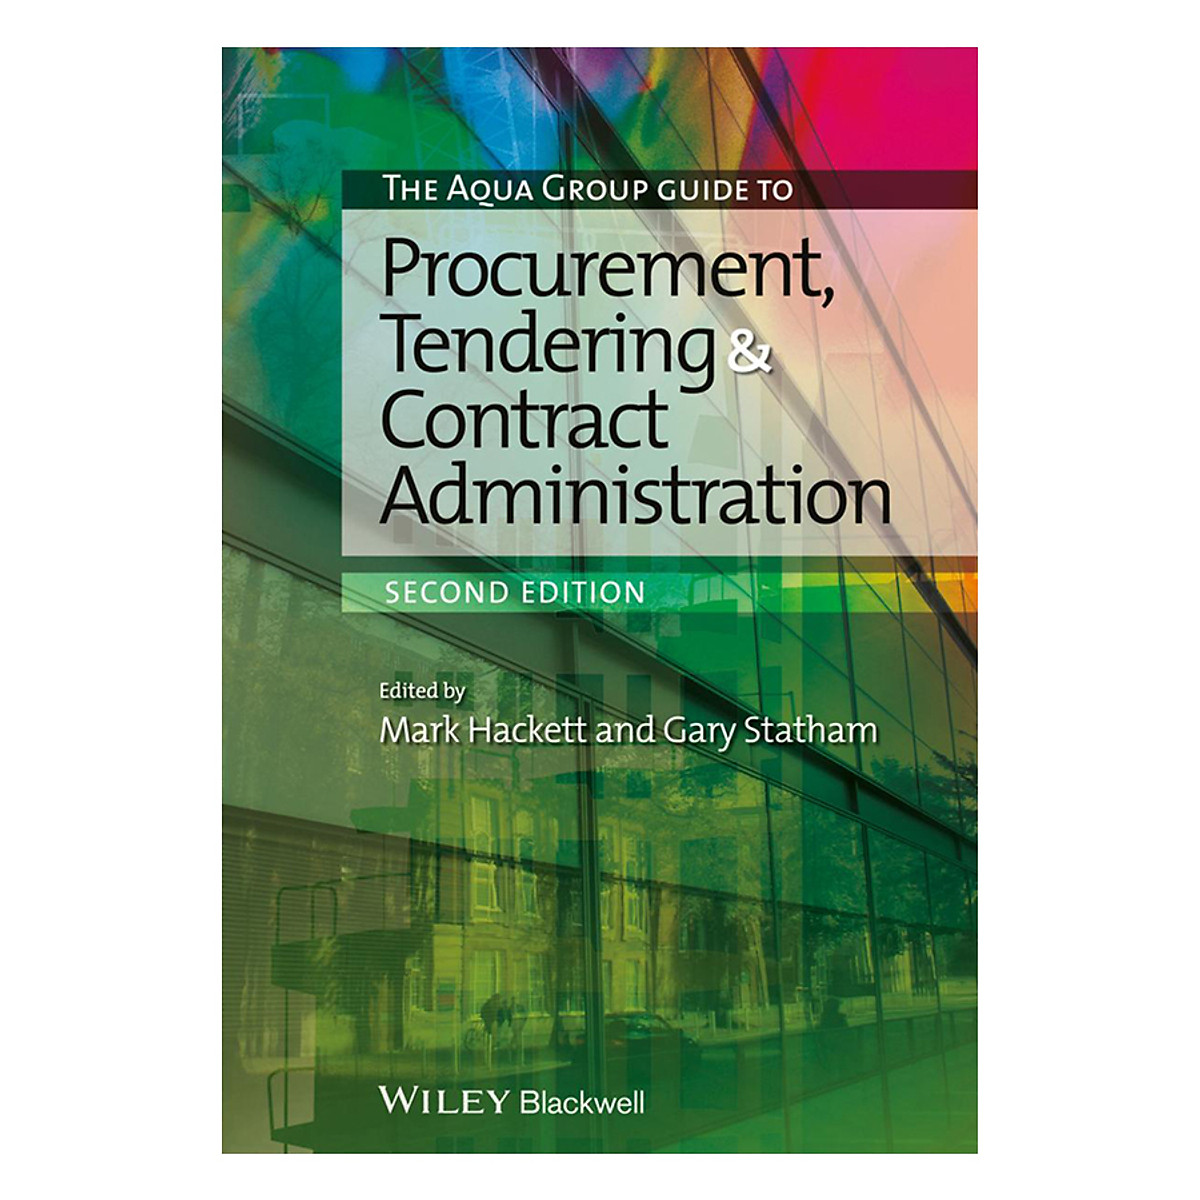 The Aqua Group Guide To Procurement, Tendering And Contract Administration 2nd Edition